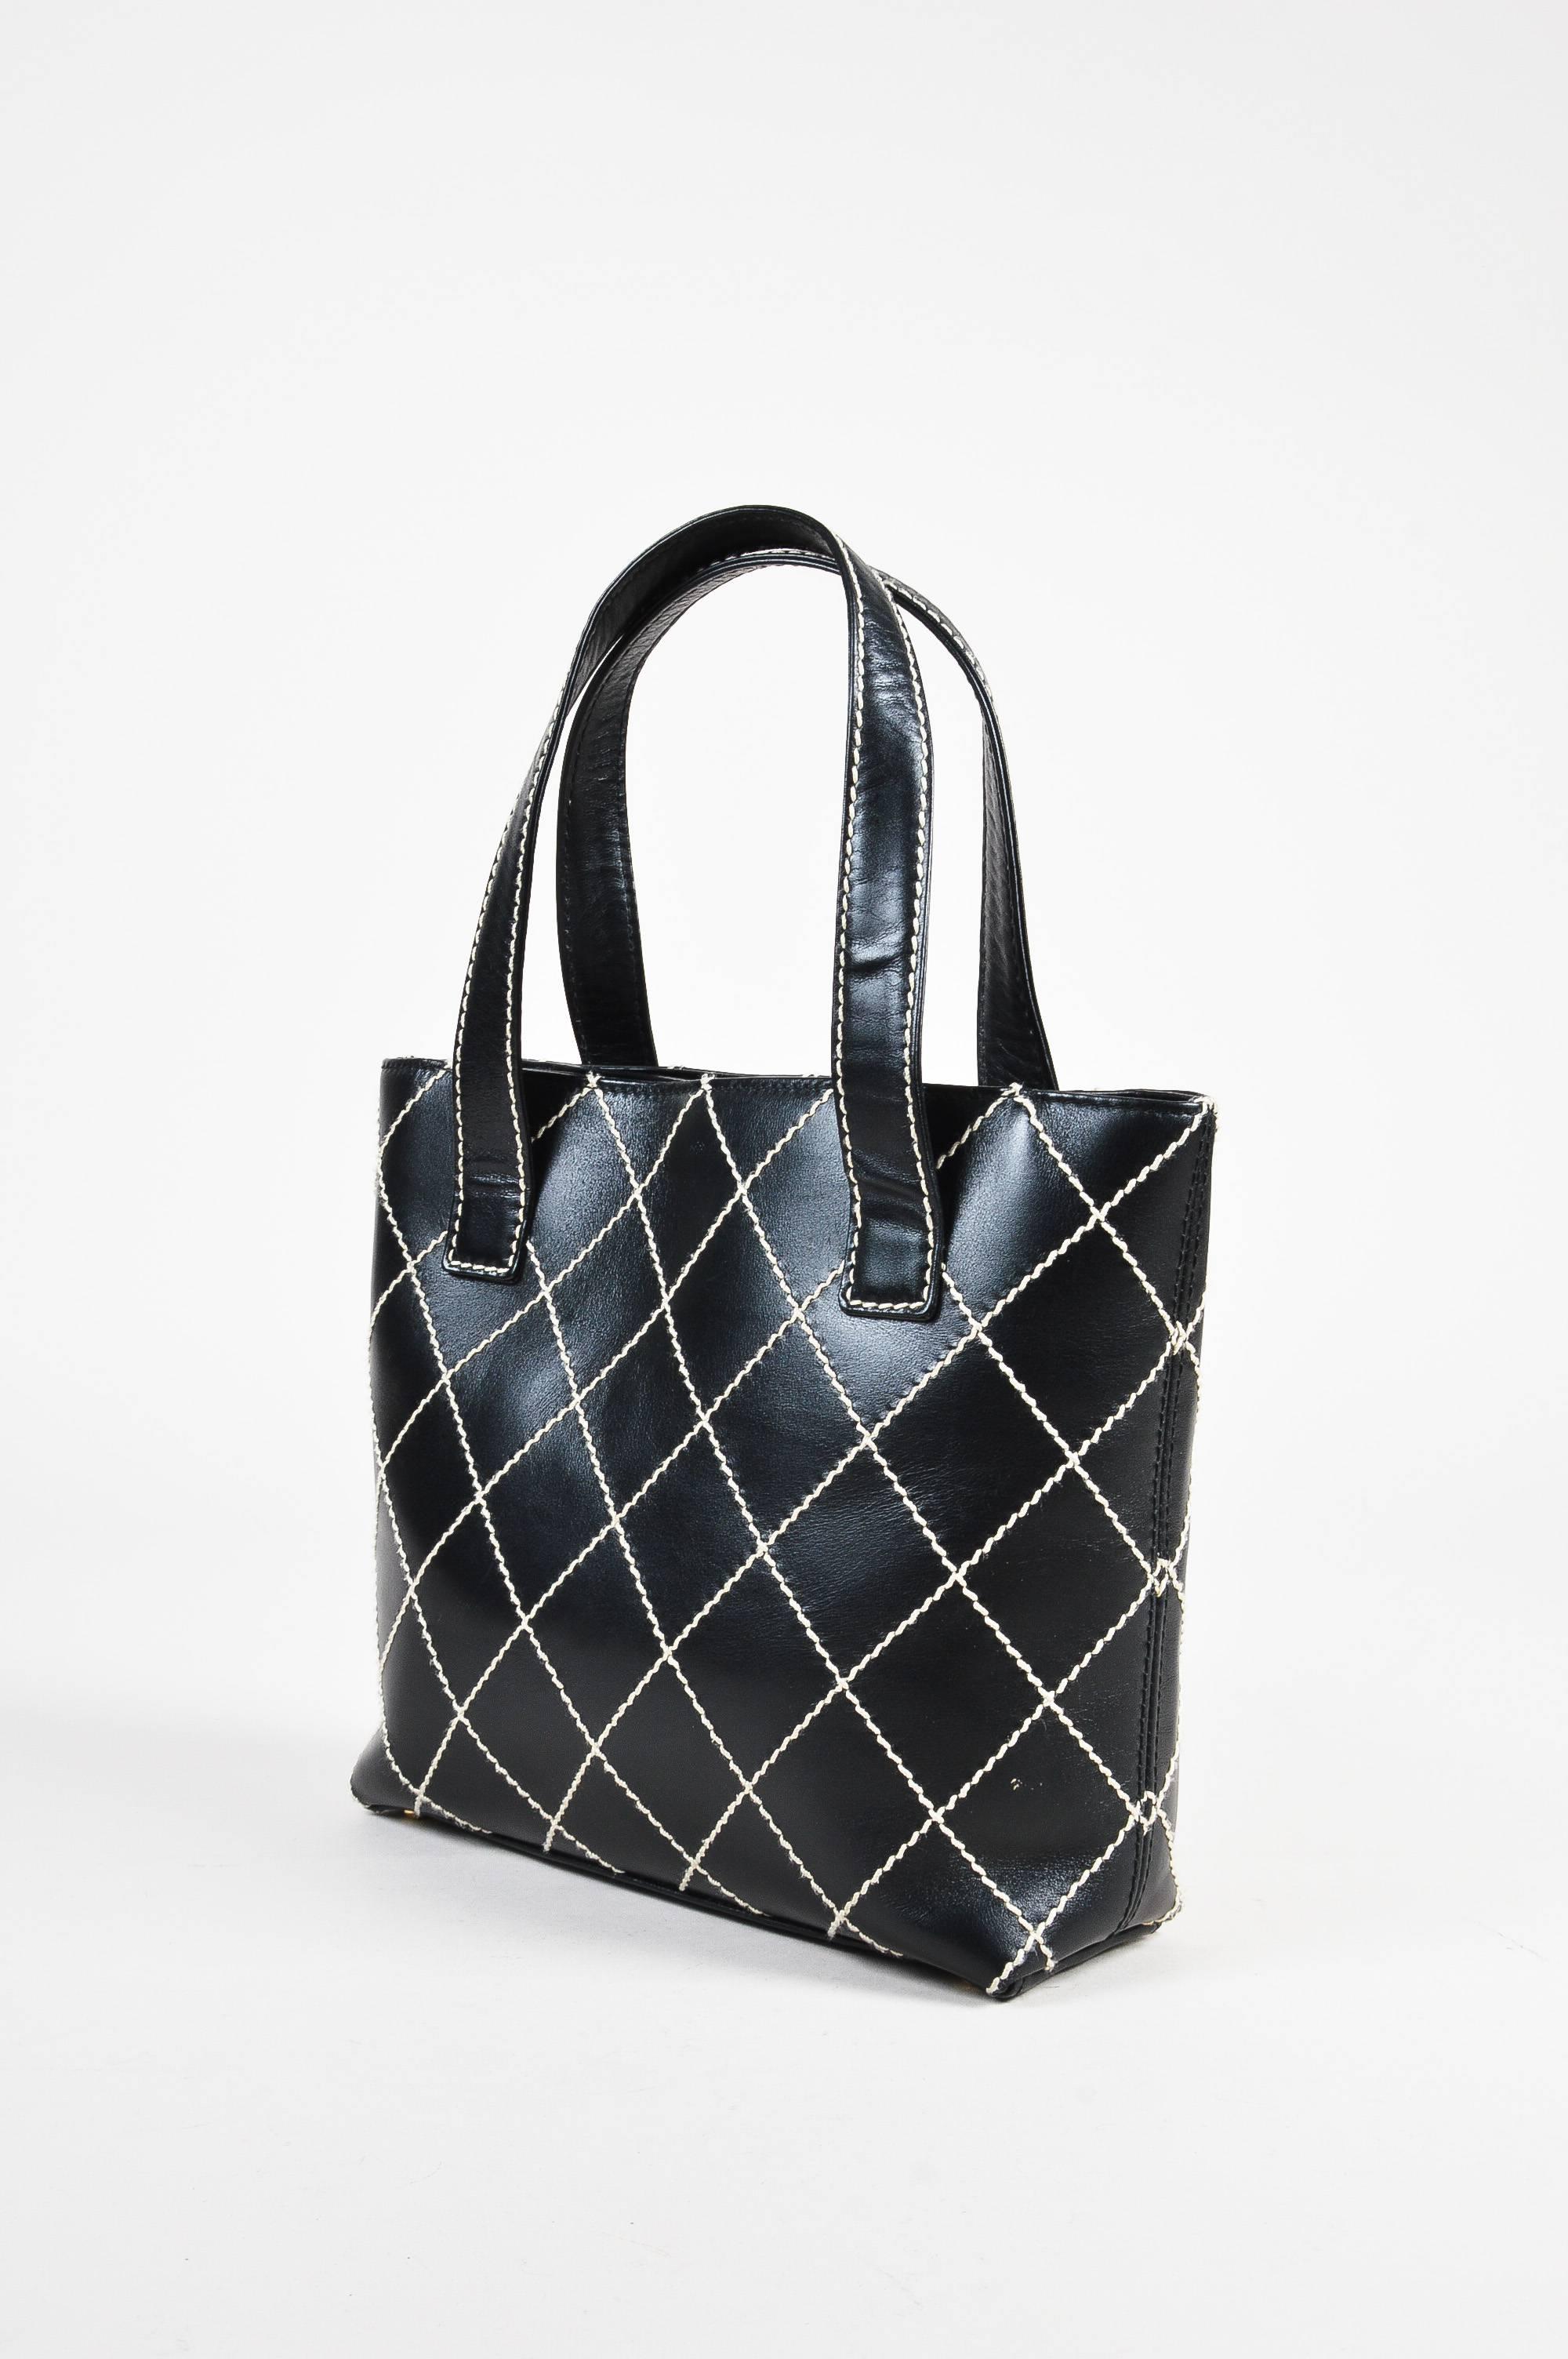 This chic tote is perfect to pair with a black suit for the office. Comes with dust bag. Black leather 